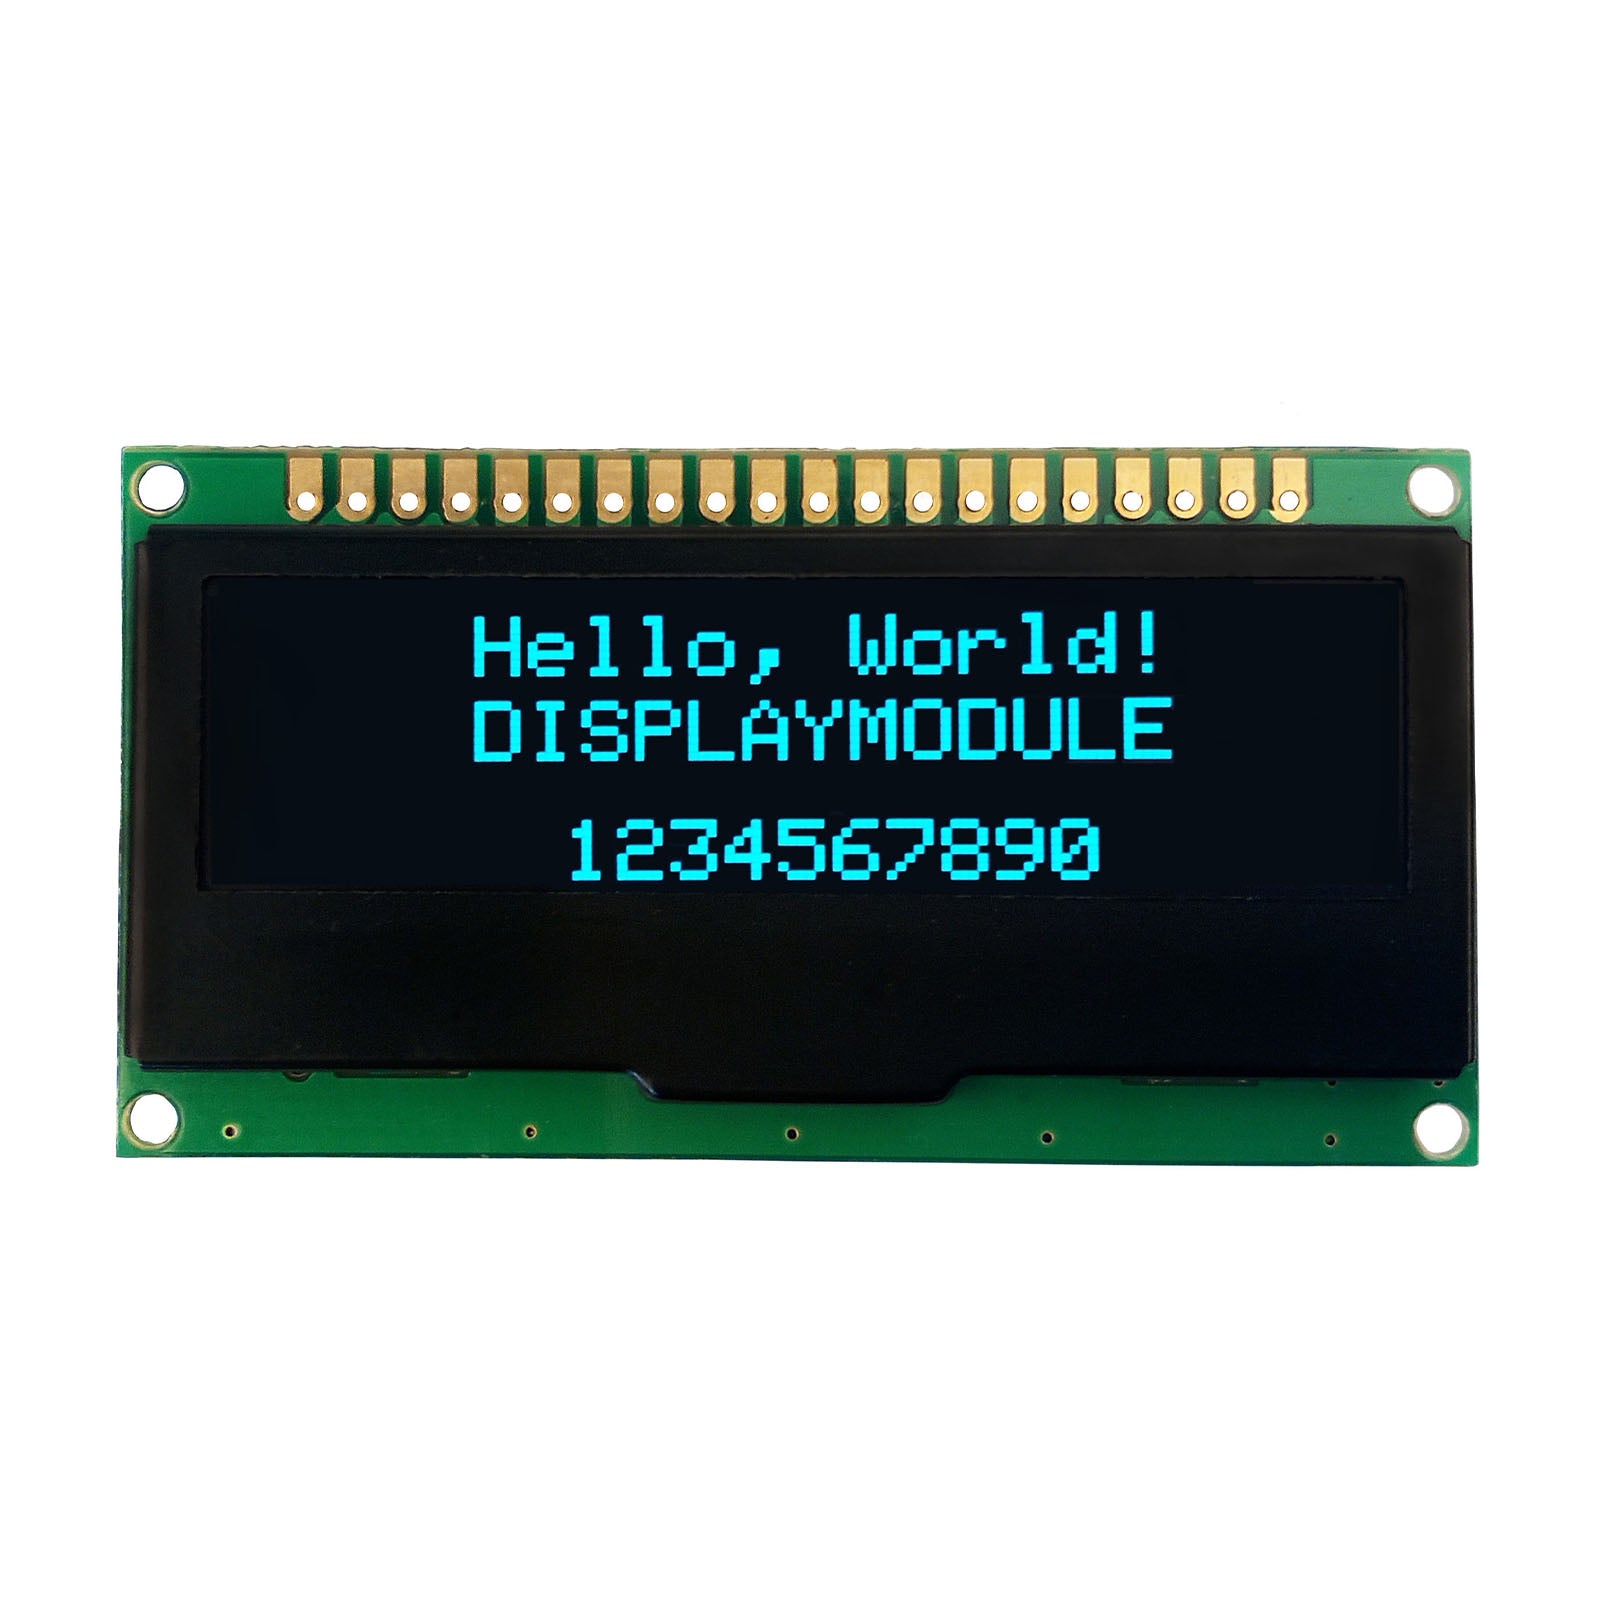 128 by 32 pixels blue OLED Graphic Display Module, compatible with MCU, SPI, and I2C interfaces